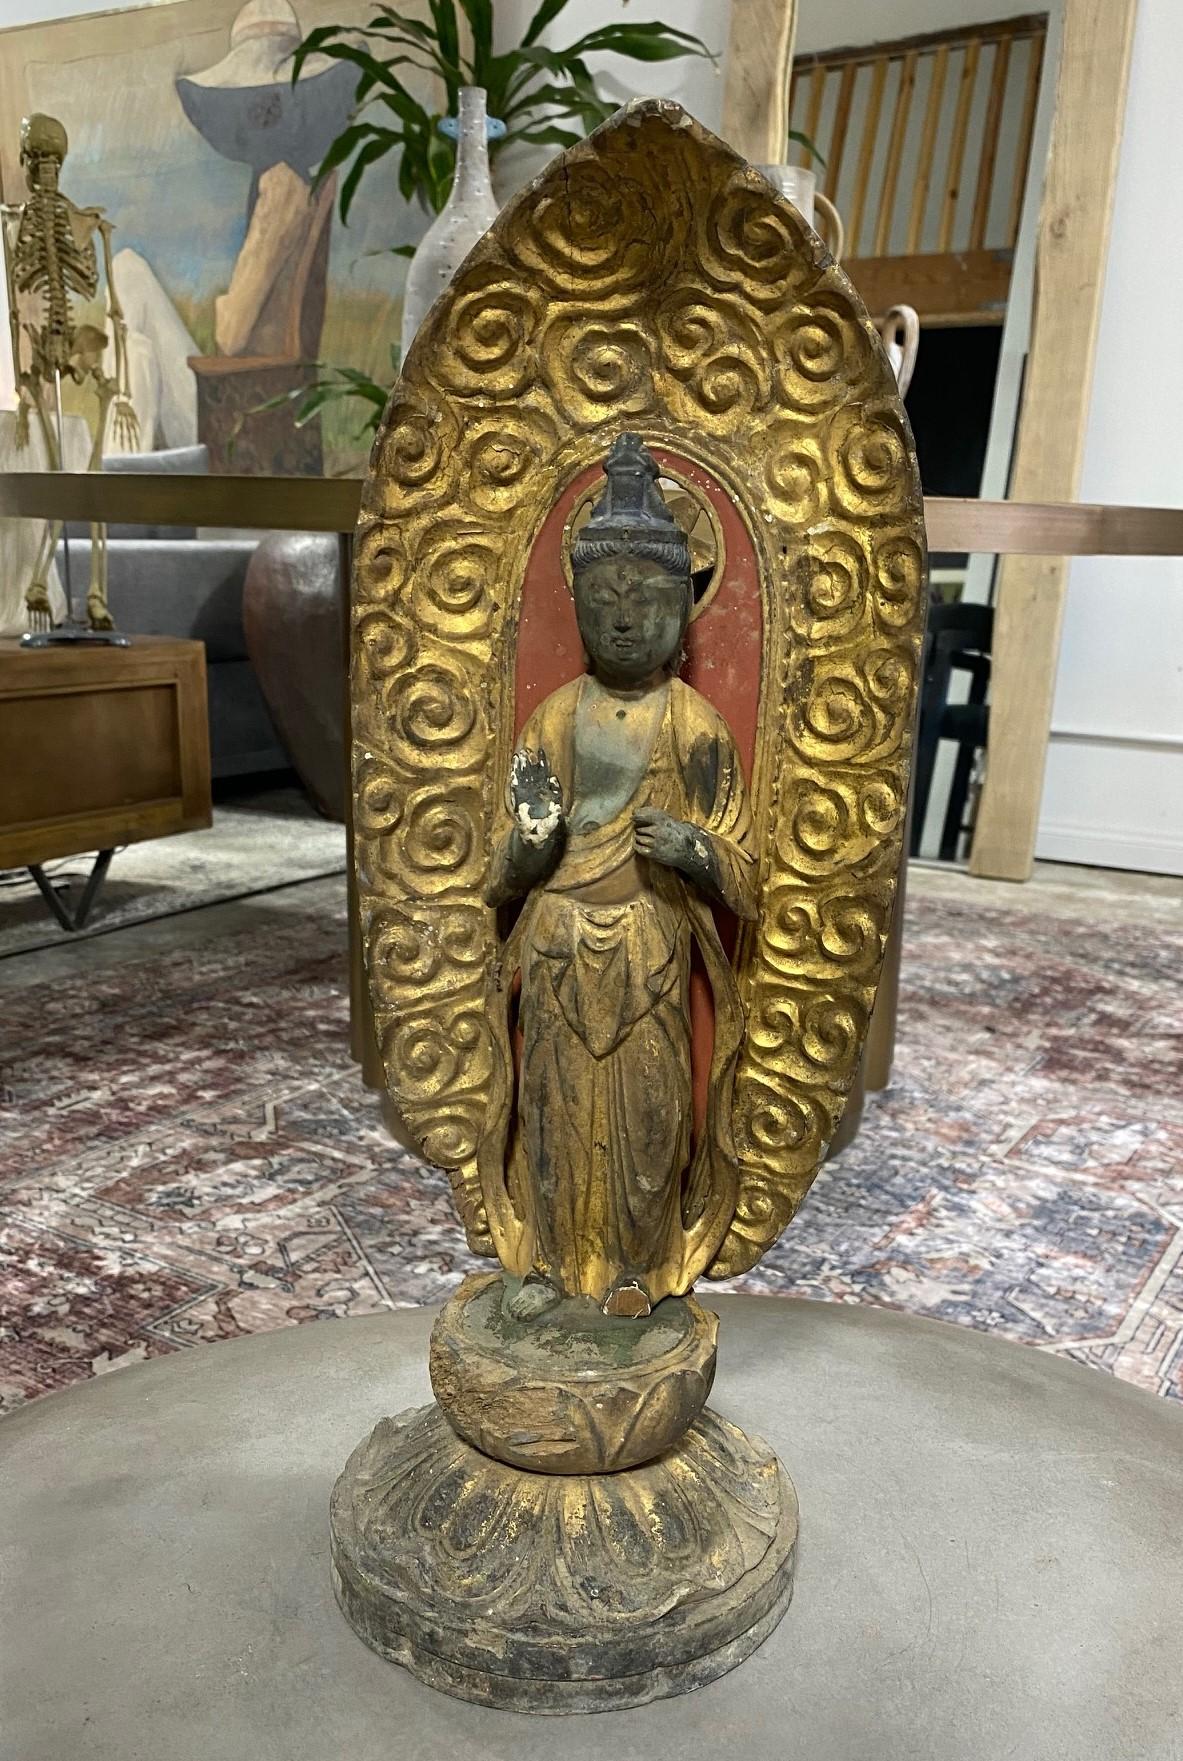 An absolutely beautiful standing Edo Period wood carved Japanese Kannon Bodhisattva Buddha Amida. One of three Buddhas (please see the last image) we acquired that were rescued from an abandoned and closed Japanese temple. 

Meticulously hand